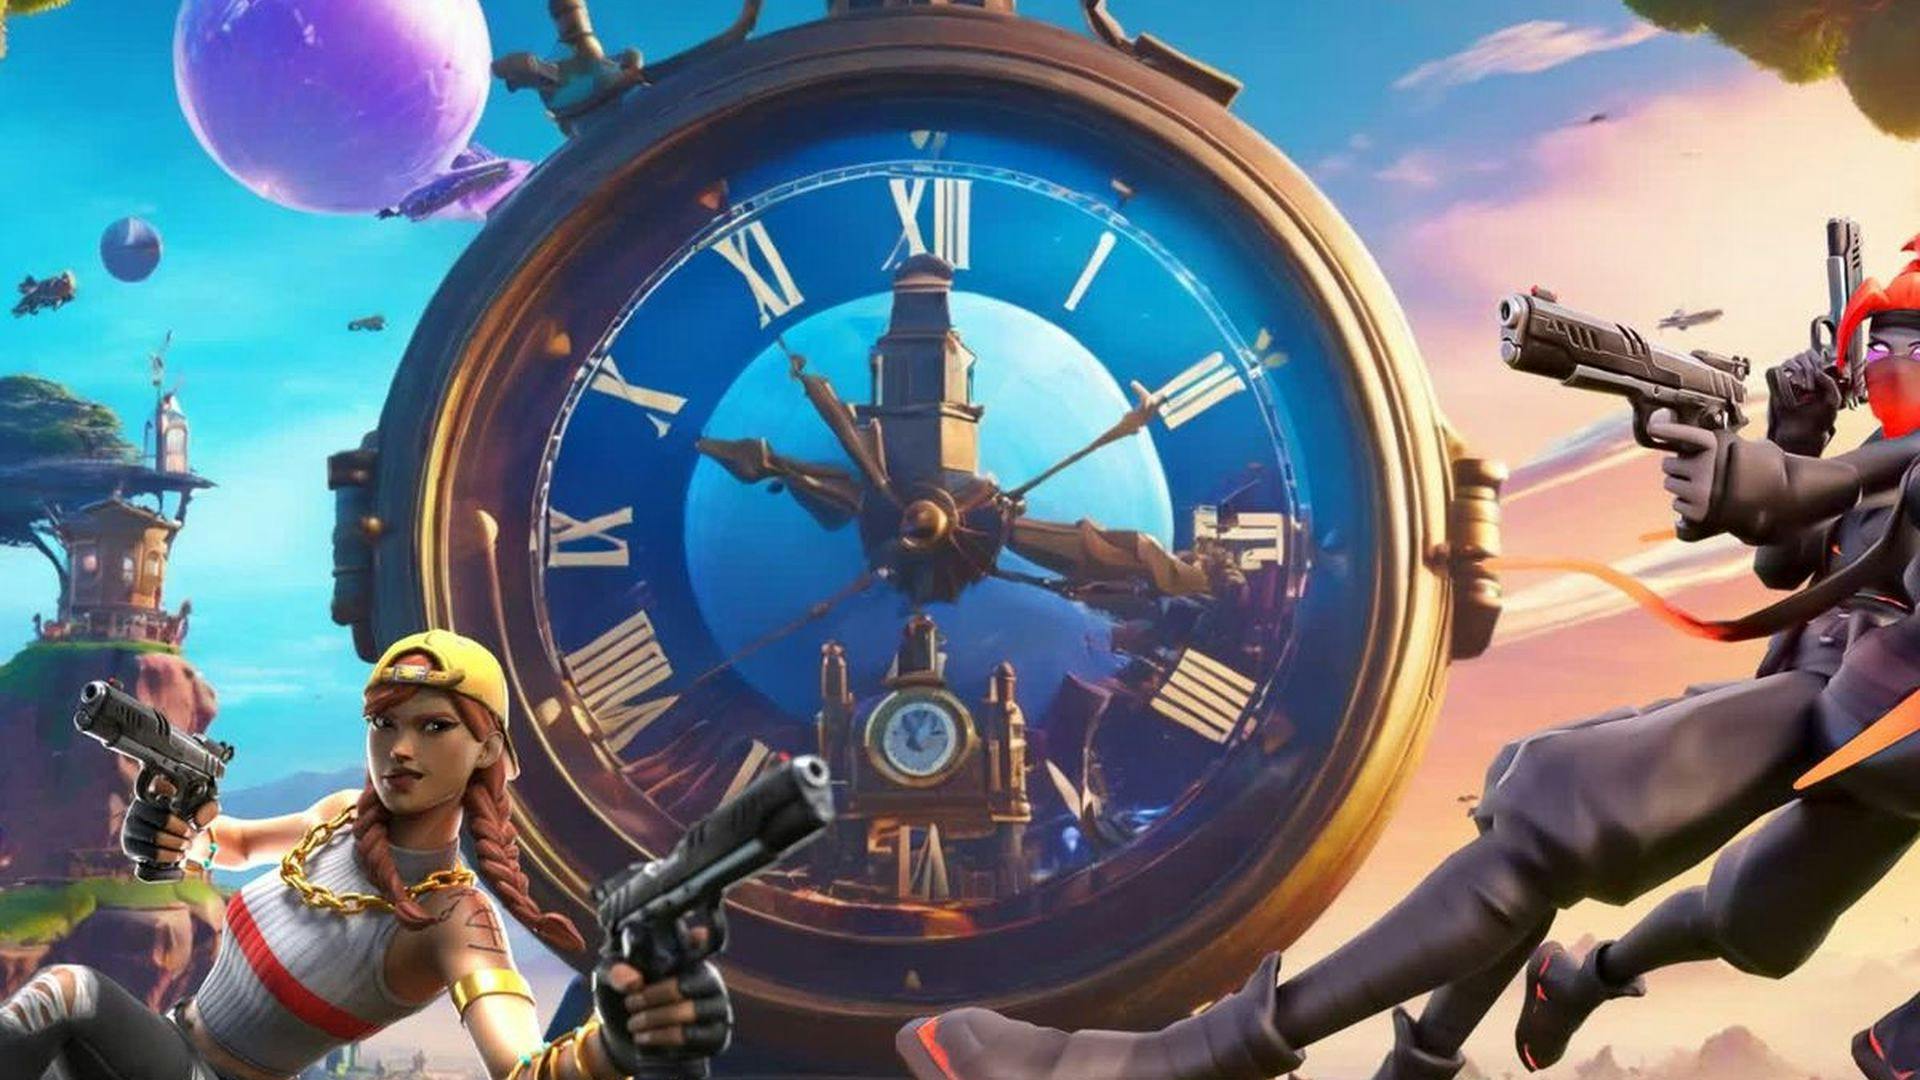 How long is a game of Fortnite?